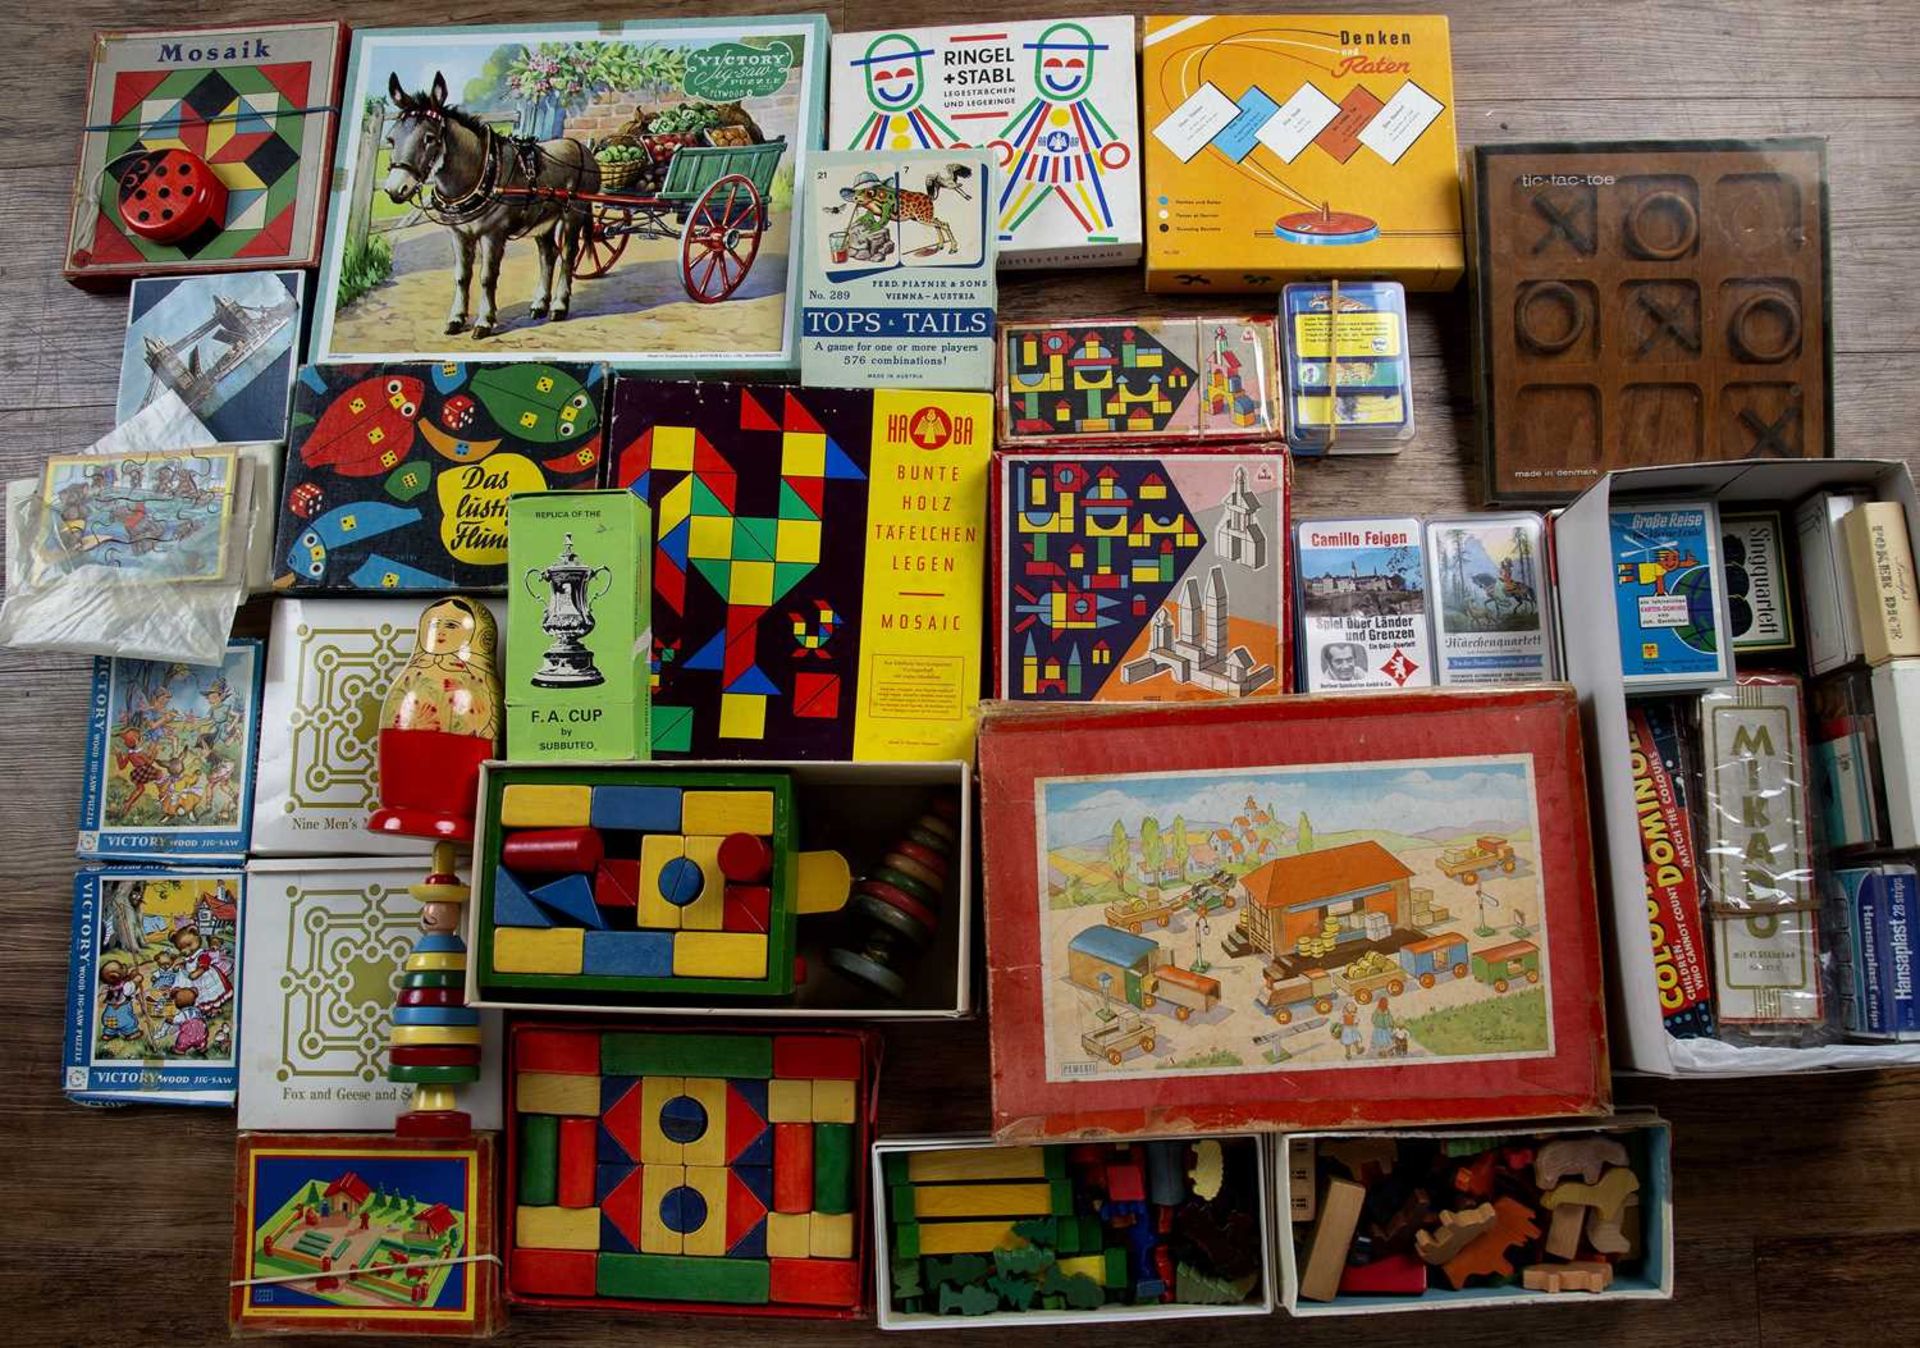 Collection of vintage toys and games comprising of: Victory jigsaw puzzles in original boxes, wooden